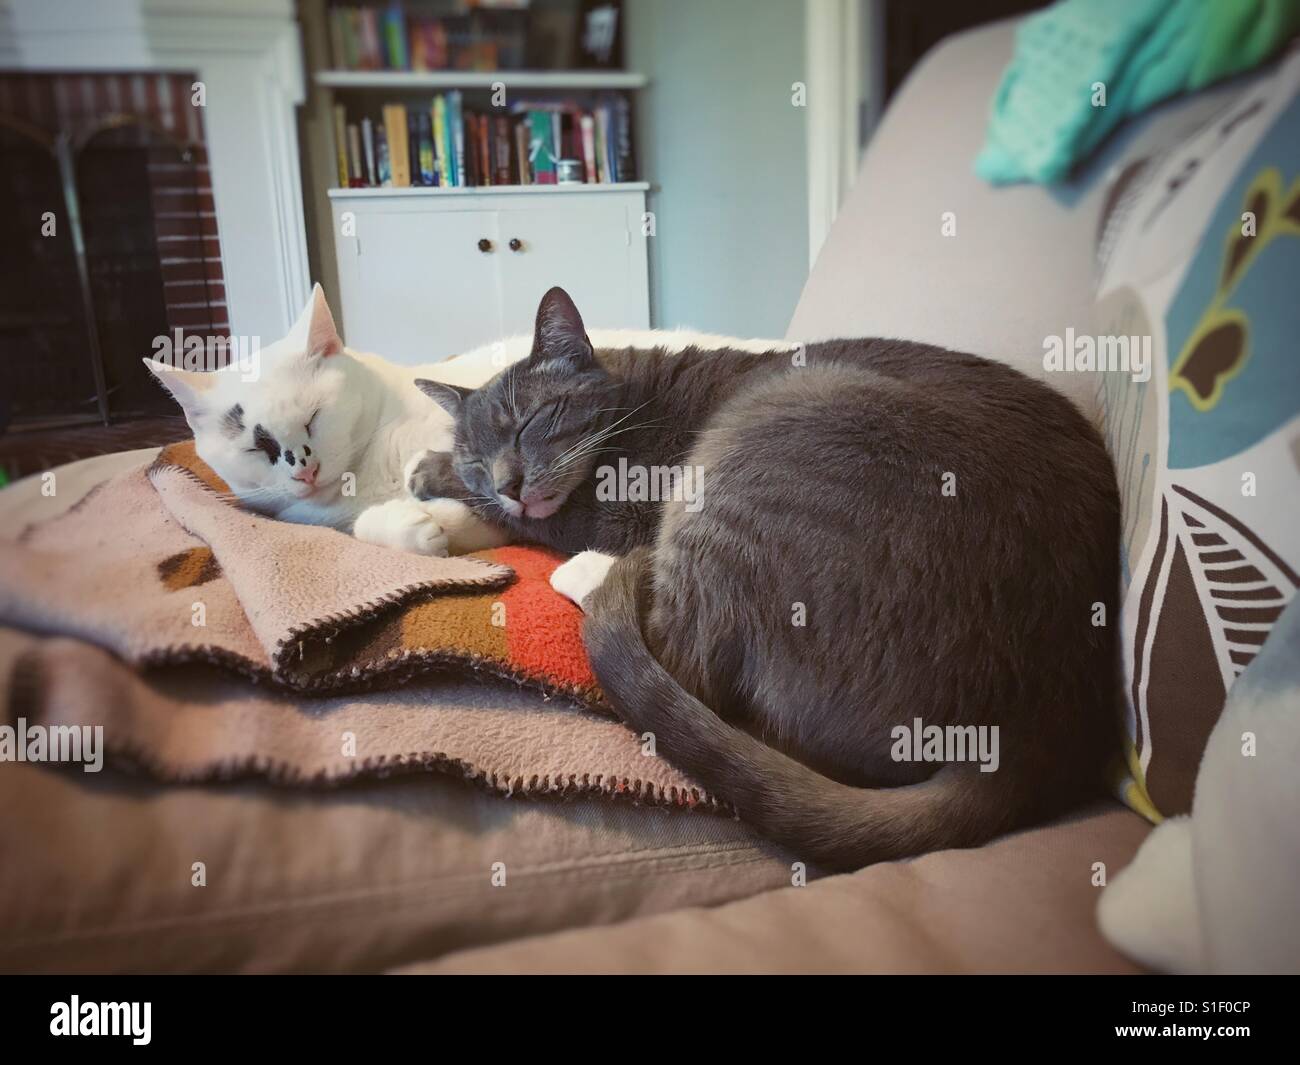 Cats cuddle together on a couch. Stock Photo